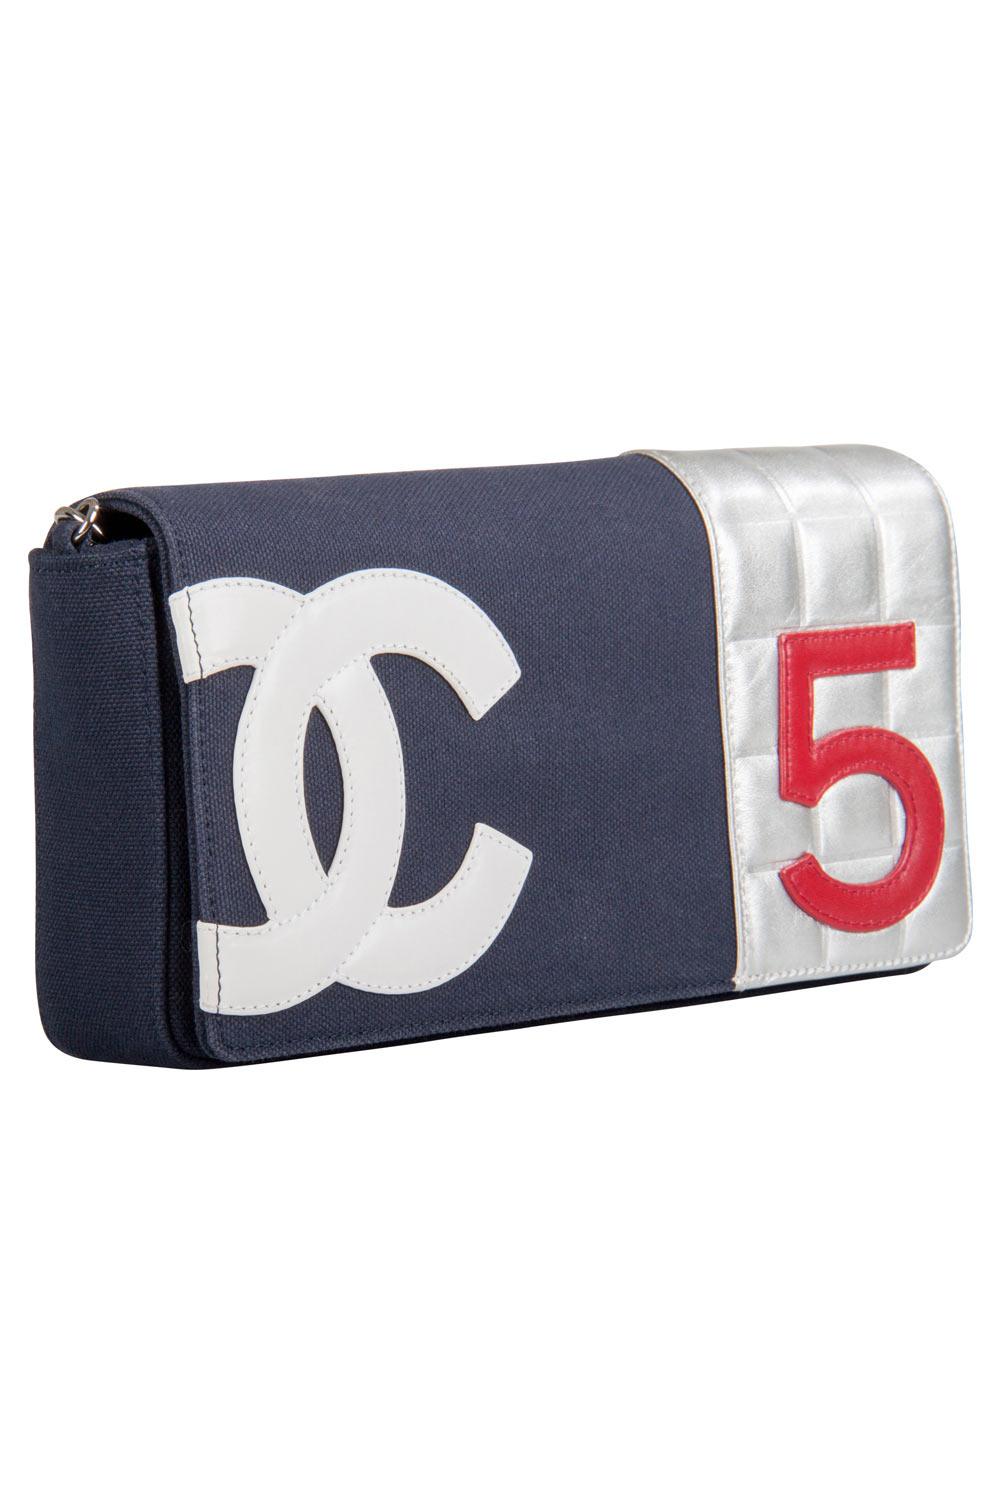 Gray Chanel Multicolor Canvas and Leather No. 5 Flap Bag